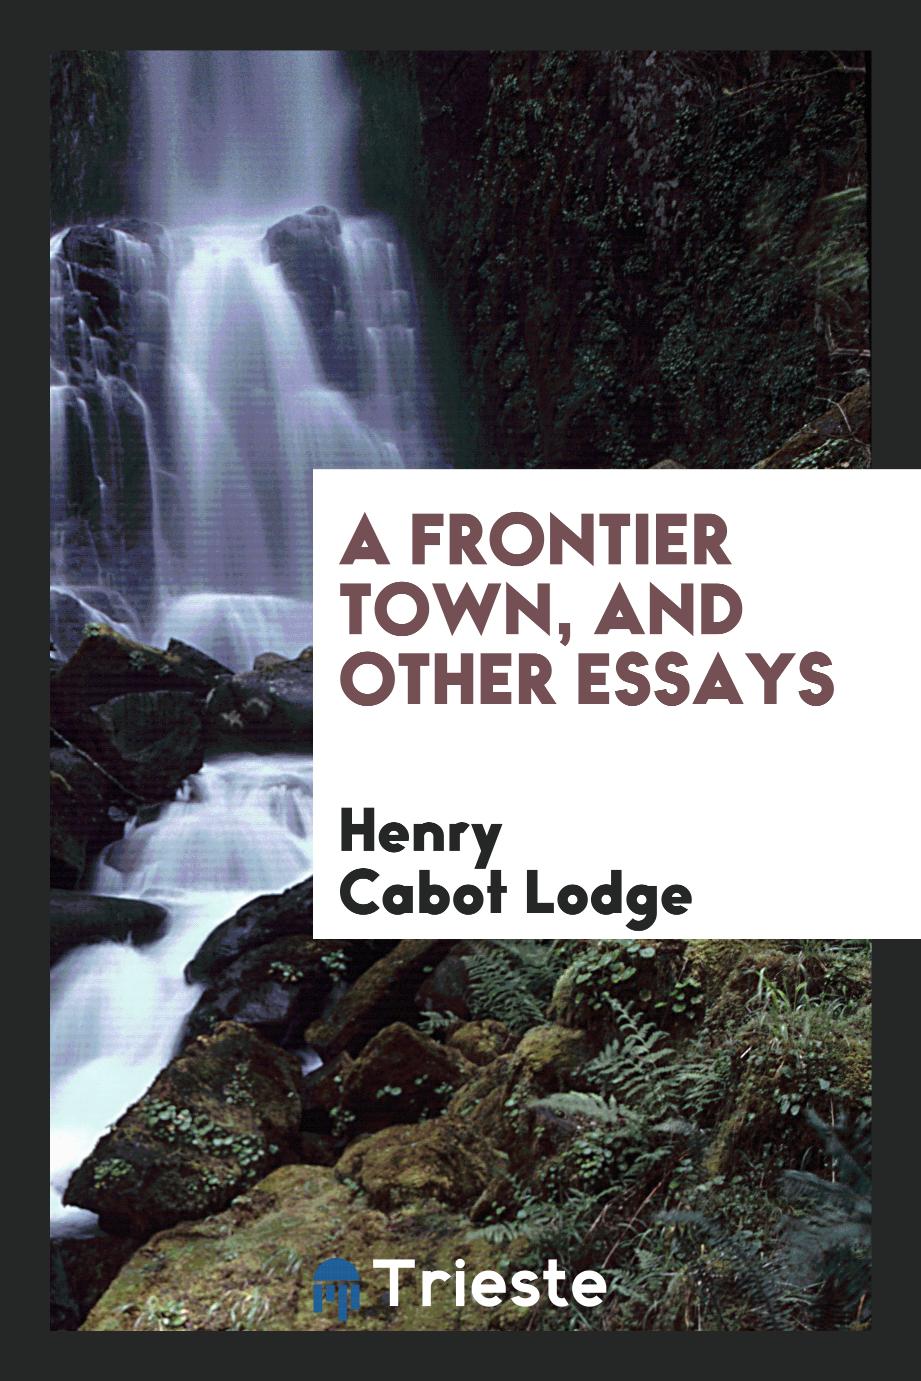 A frontier town, and other essays